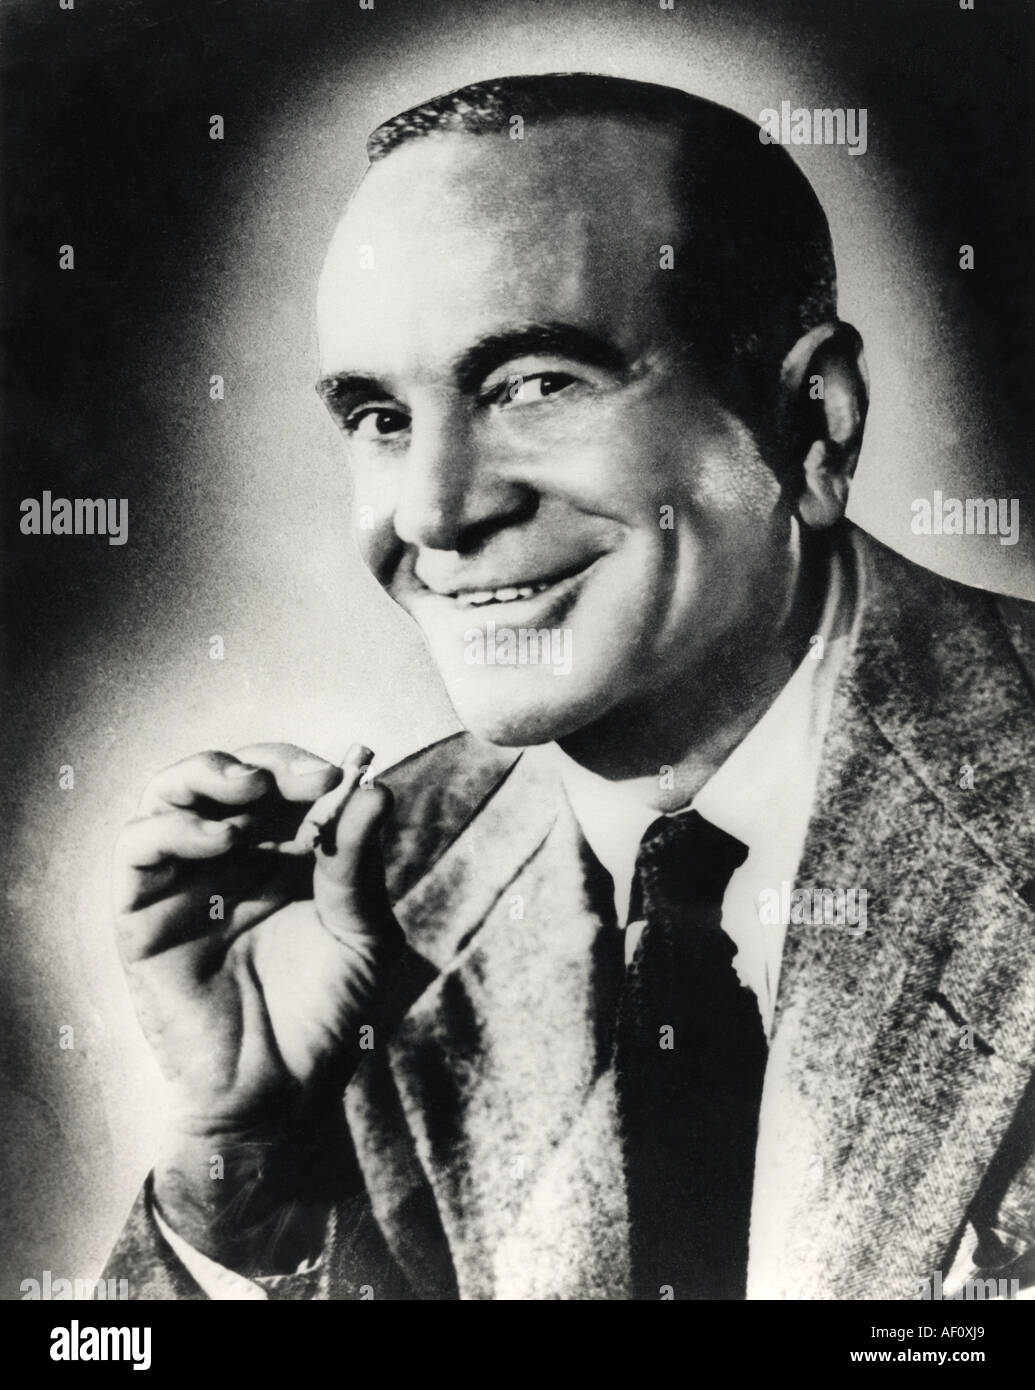 Al Jolson High Resolution Stock Photography and Images - Alamy